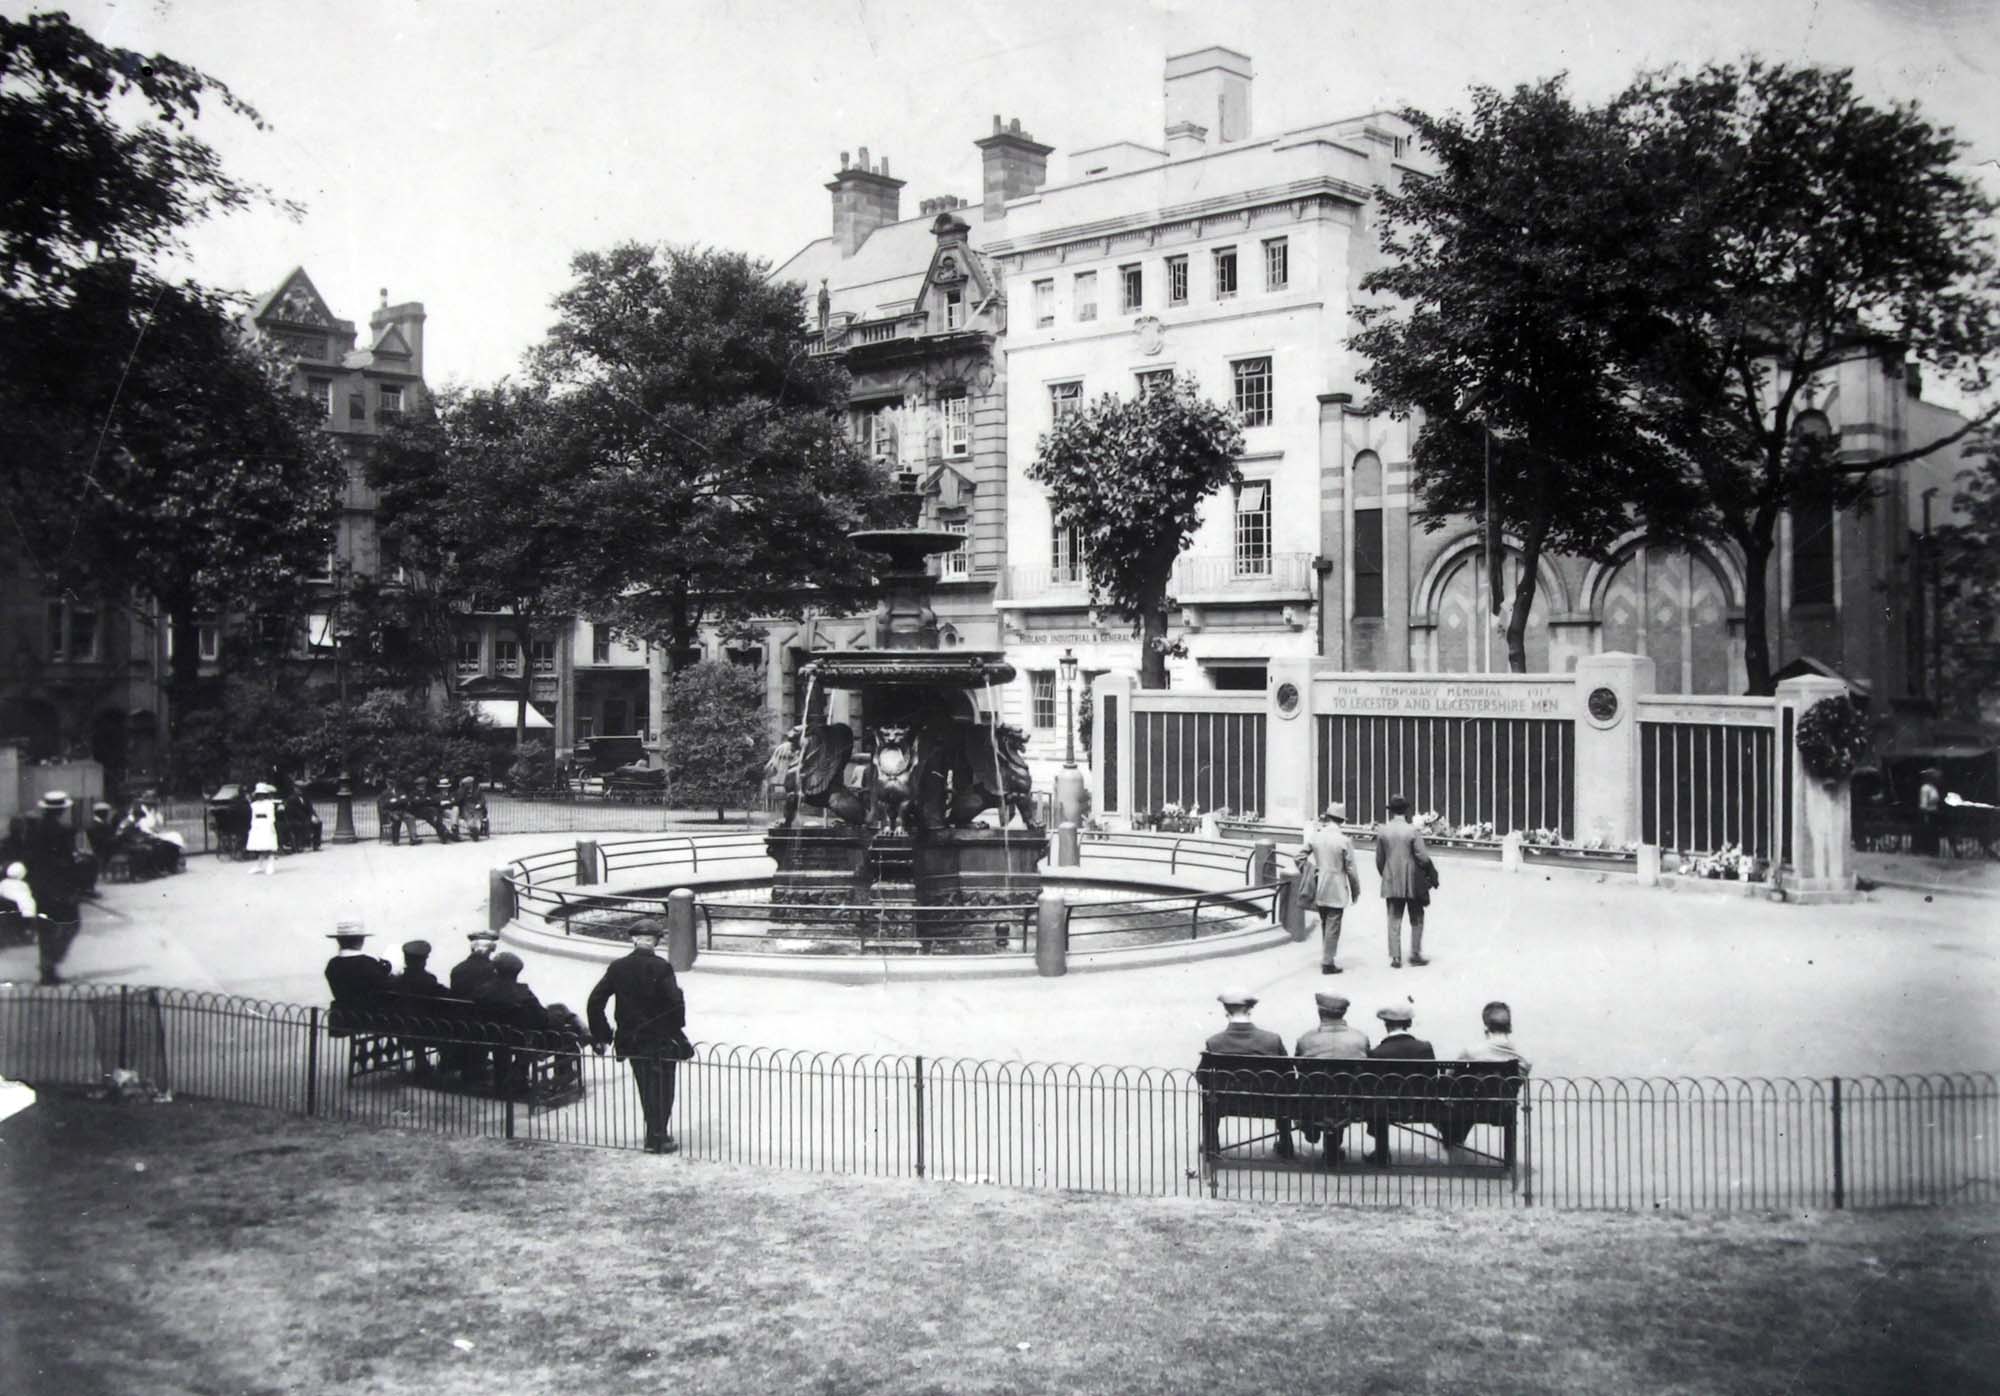 The temporary war memorial in Town Hall Square - Leicestershire Record Office